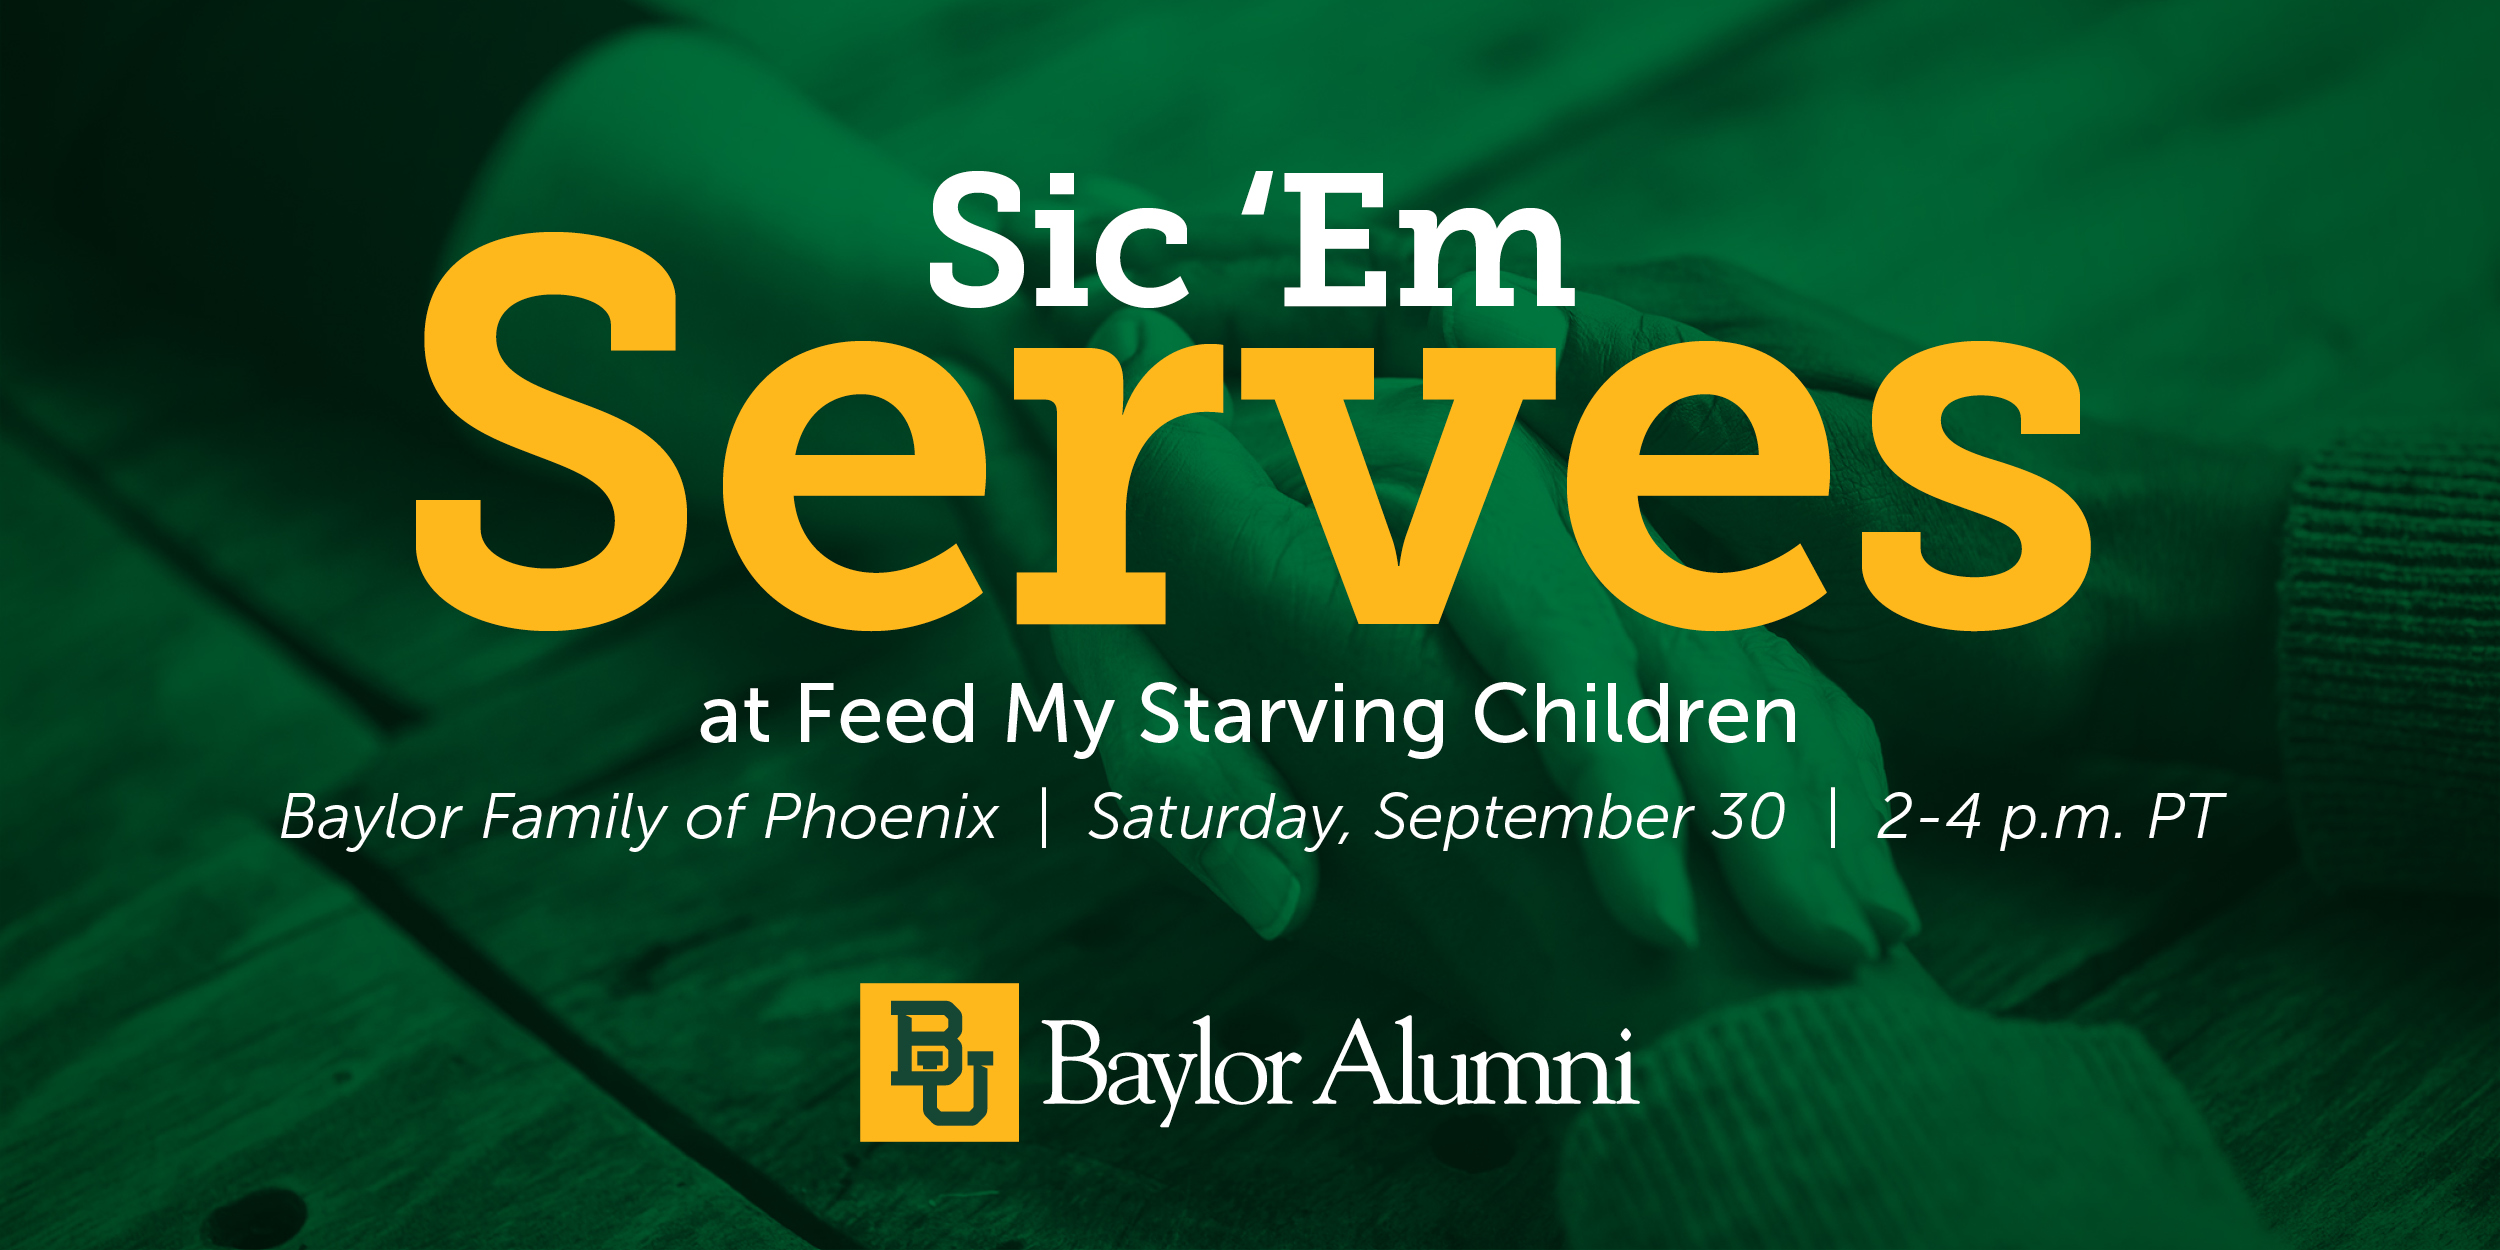 Baylor Family of Phoenix Sic 'Em Serves at Feed My Starving Children